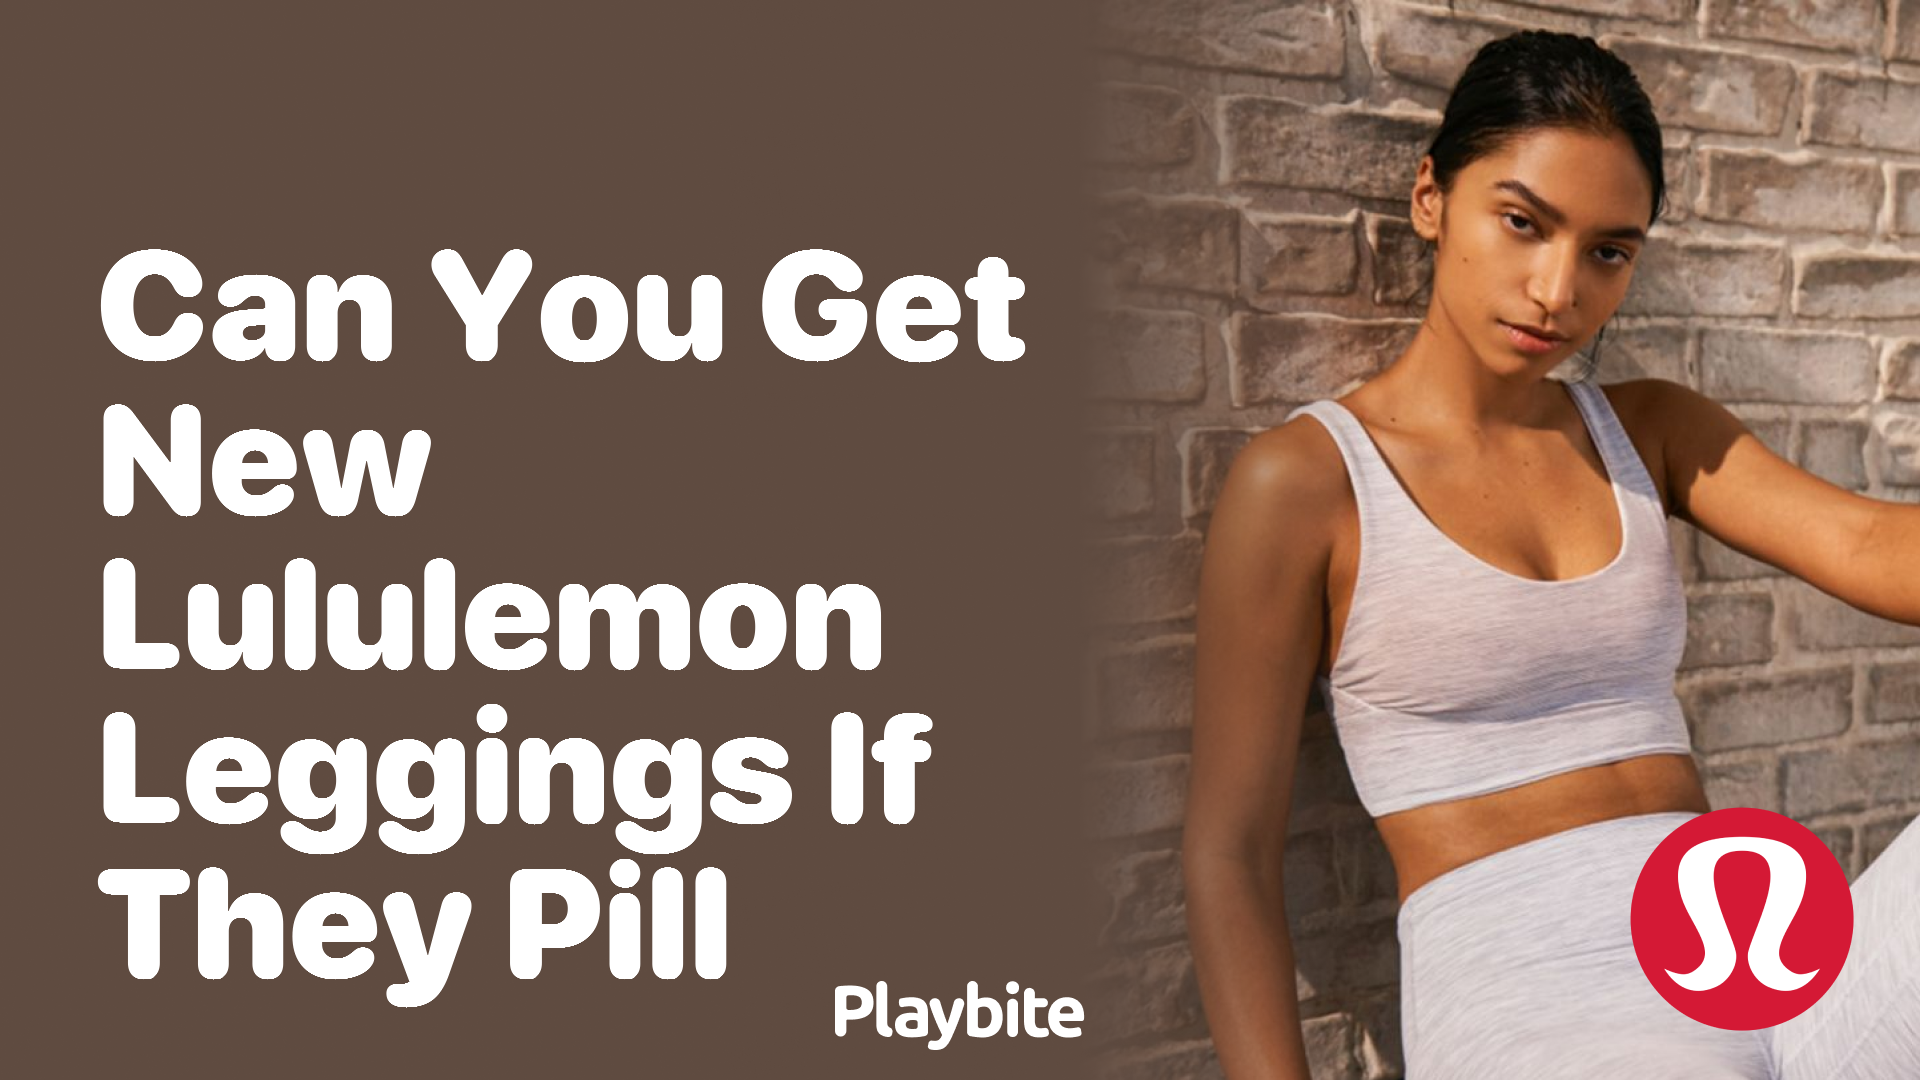 Can You Get New Lululemon Leggings If They Pill? - Playbite